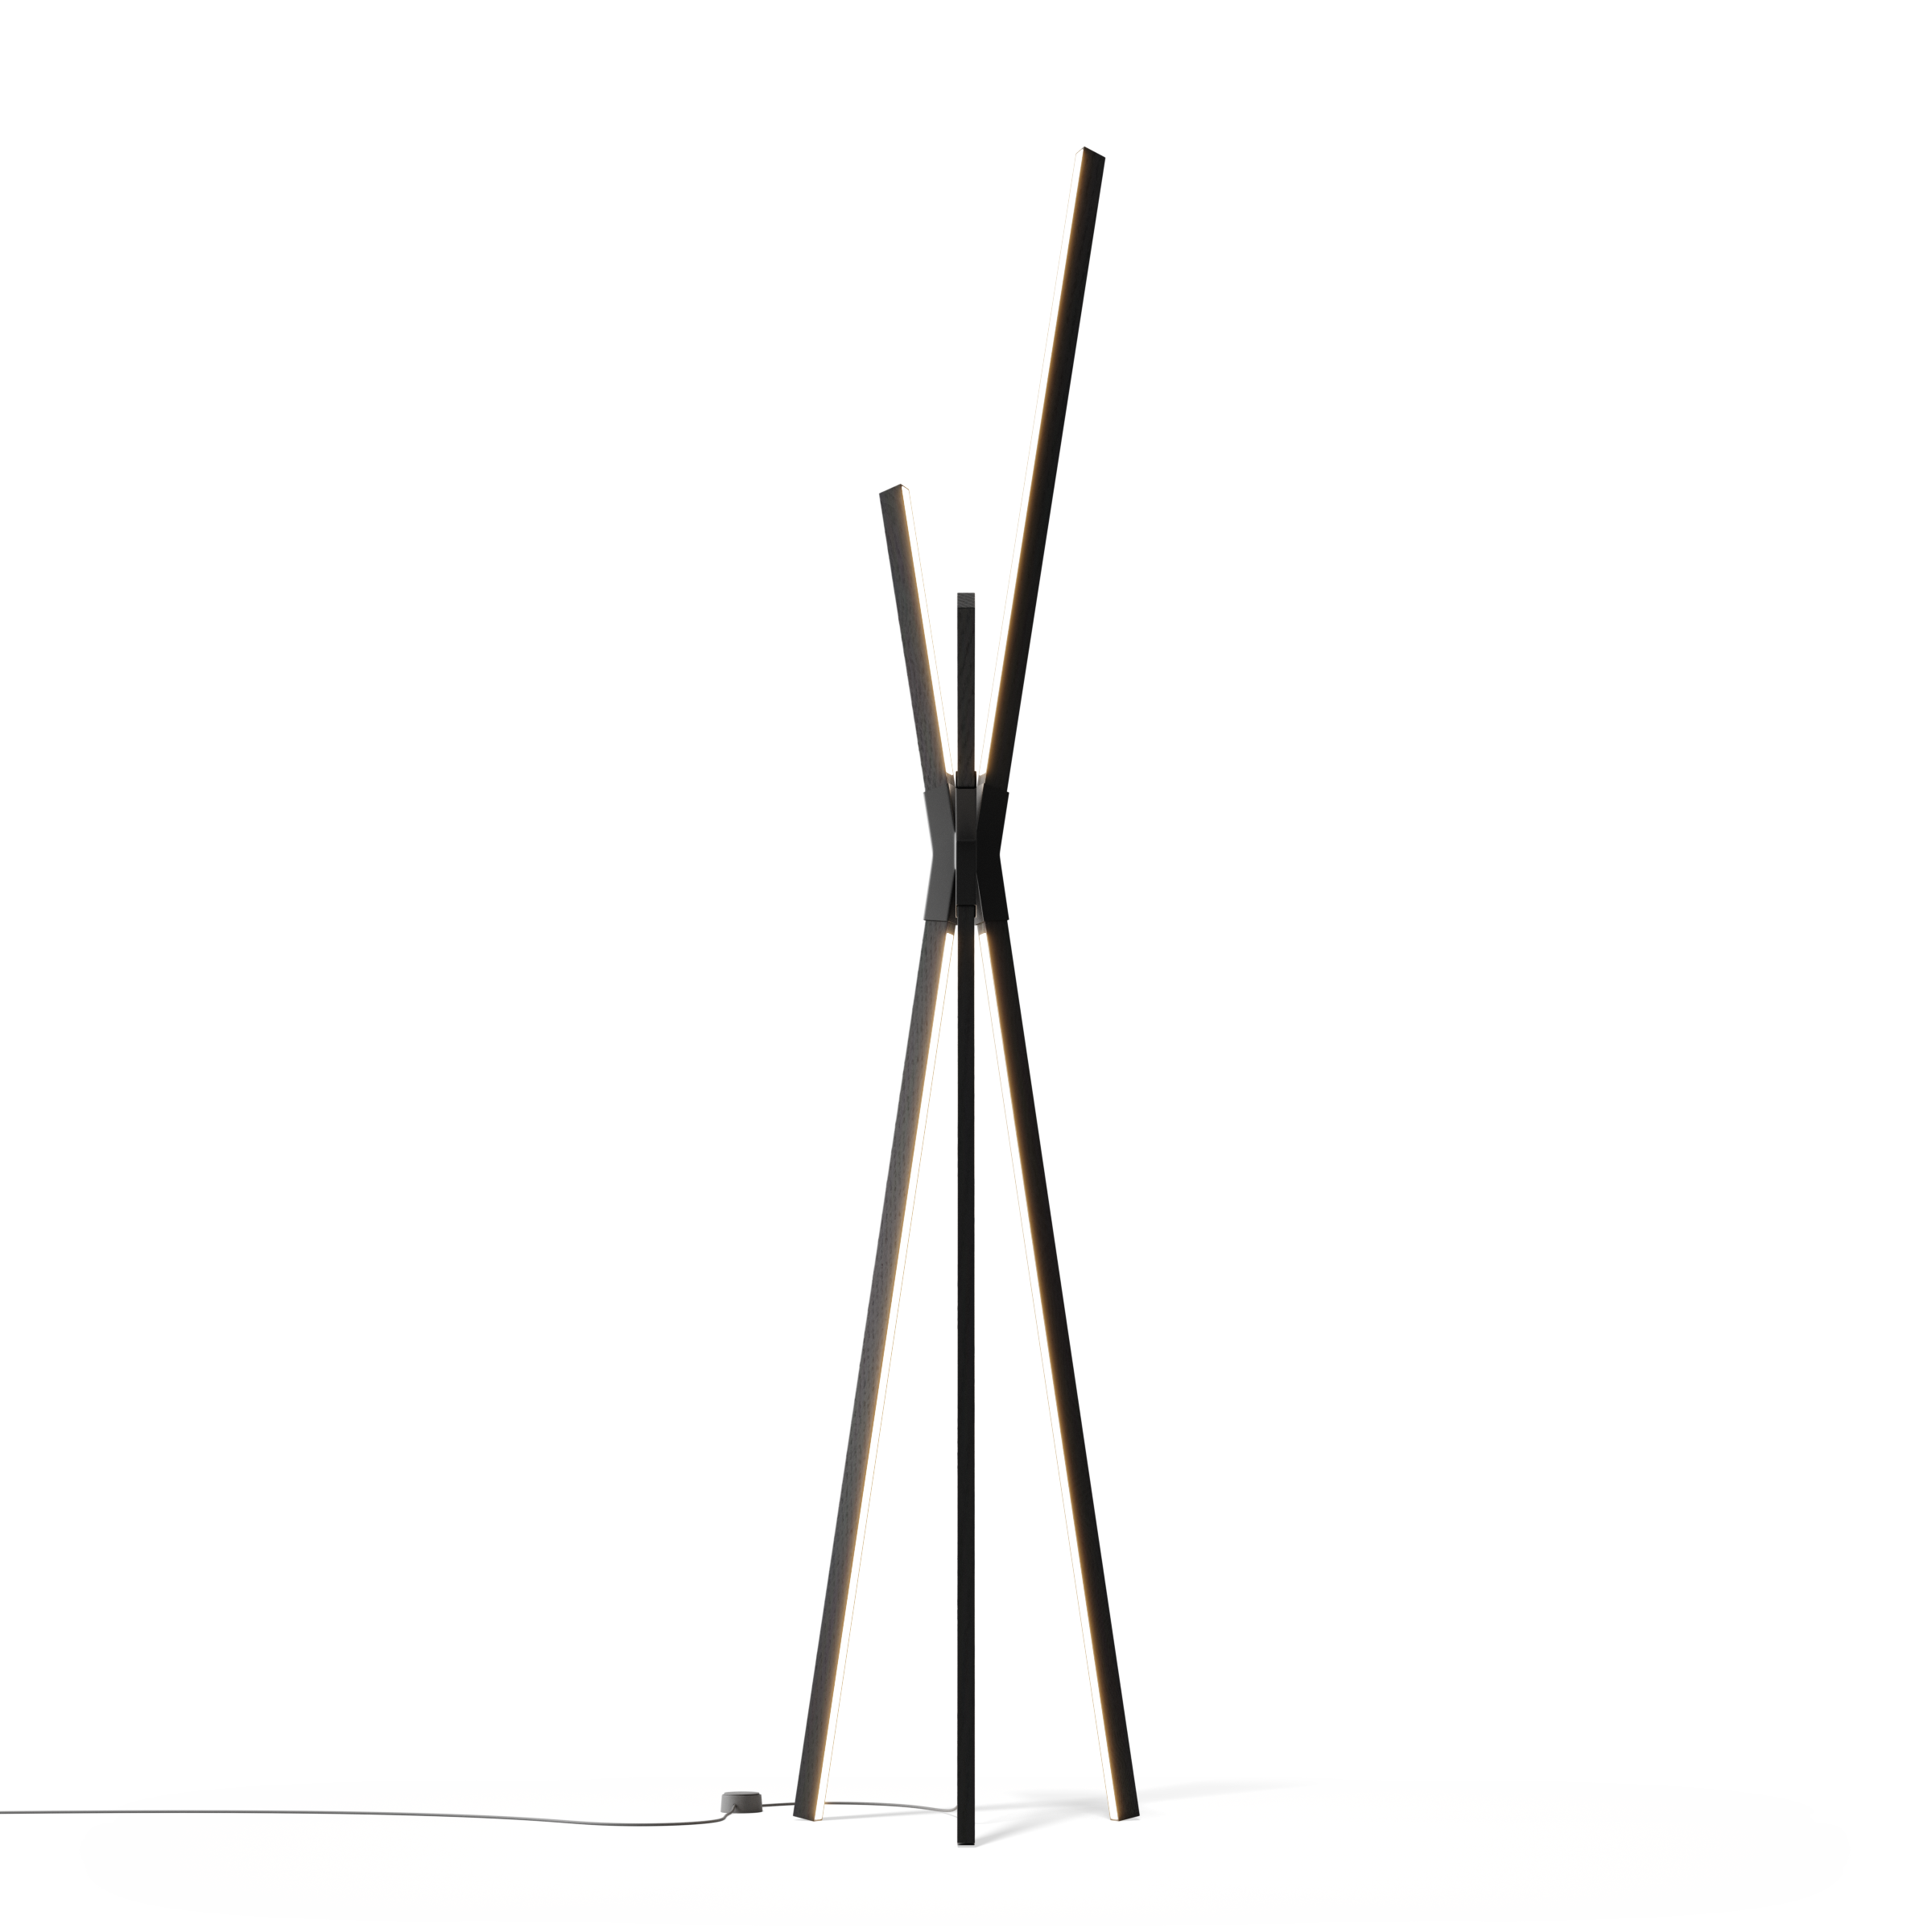 Image of a Stickbulb Floor Bang lighting fixture. The modern fixture consists of sleek wooden beams with multiple integrated LED bulbs.